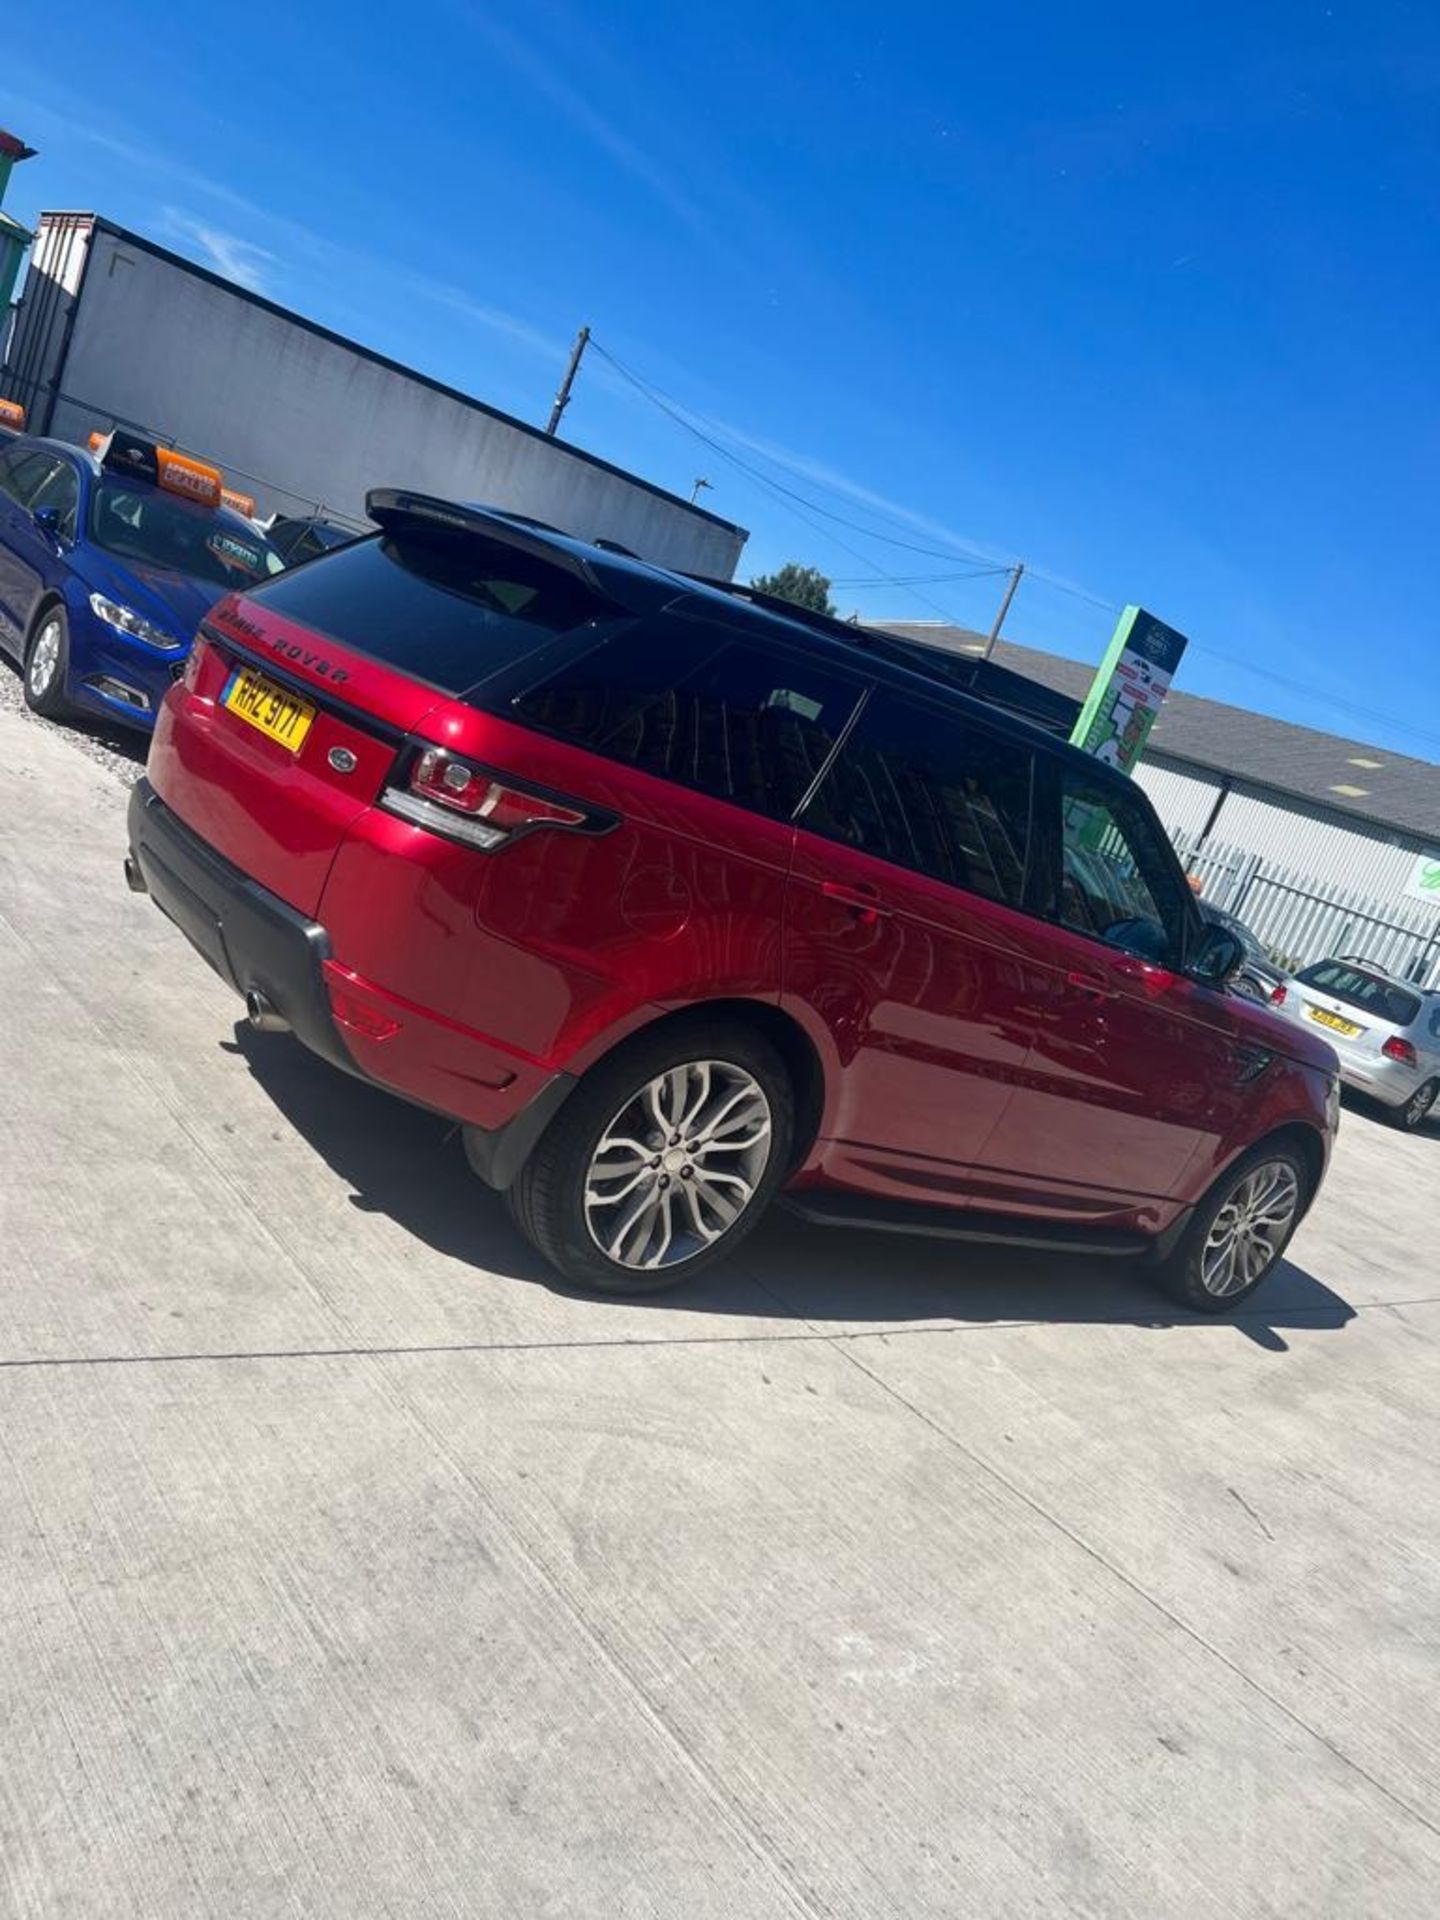 2014 LAND ROVER RANGE ROVER SPORT AUTOBIOGRAPHY DYNAMIC SDV8 AUTOMATIC RED *PLUS VAT* - Image 5 of 13